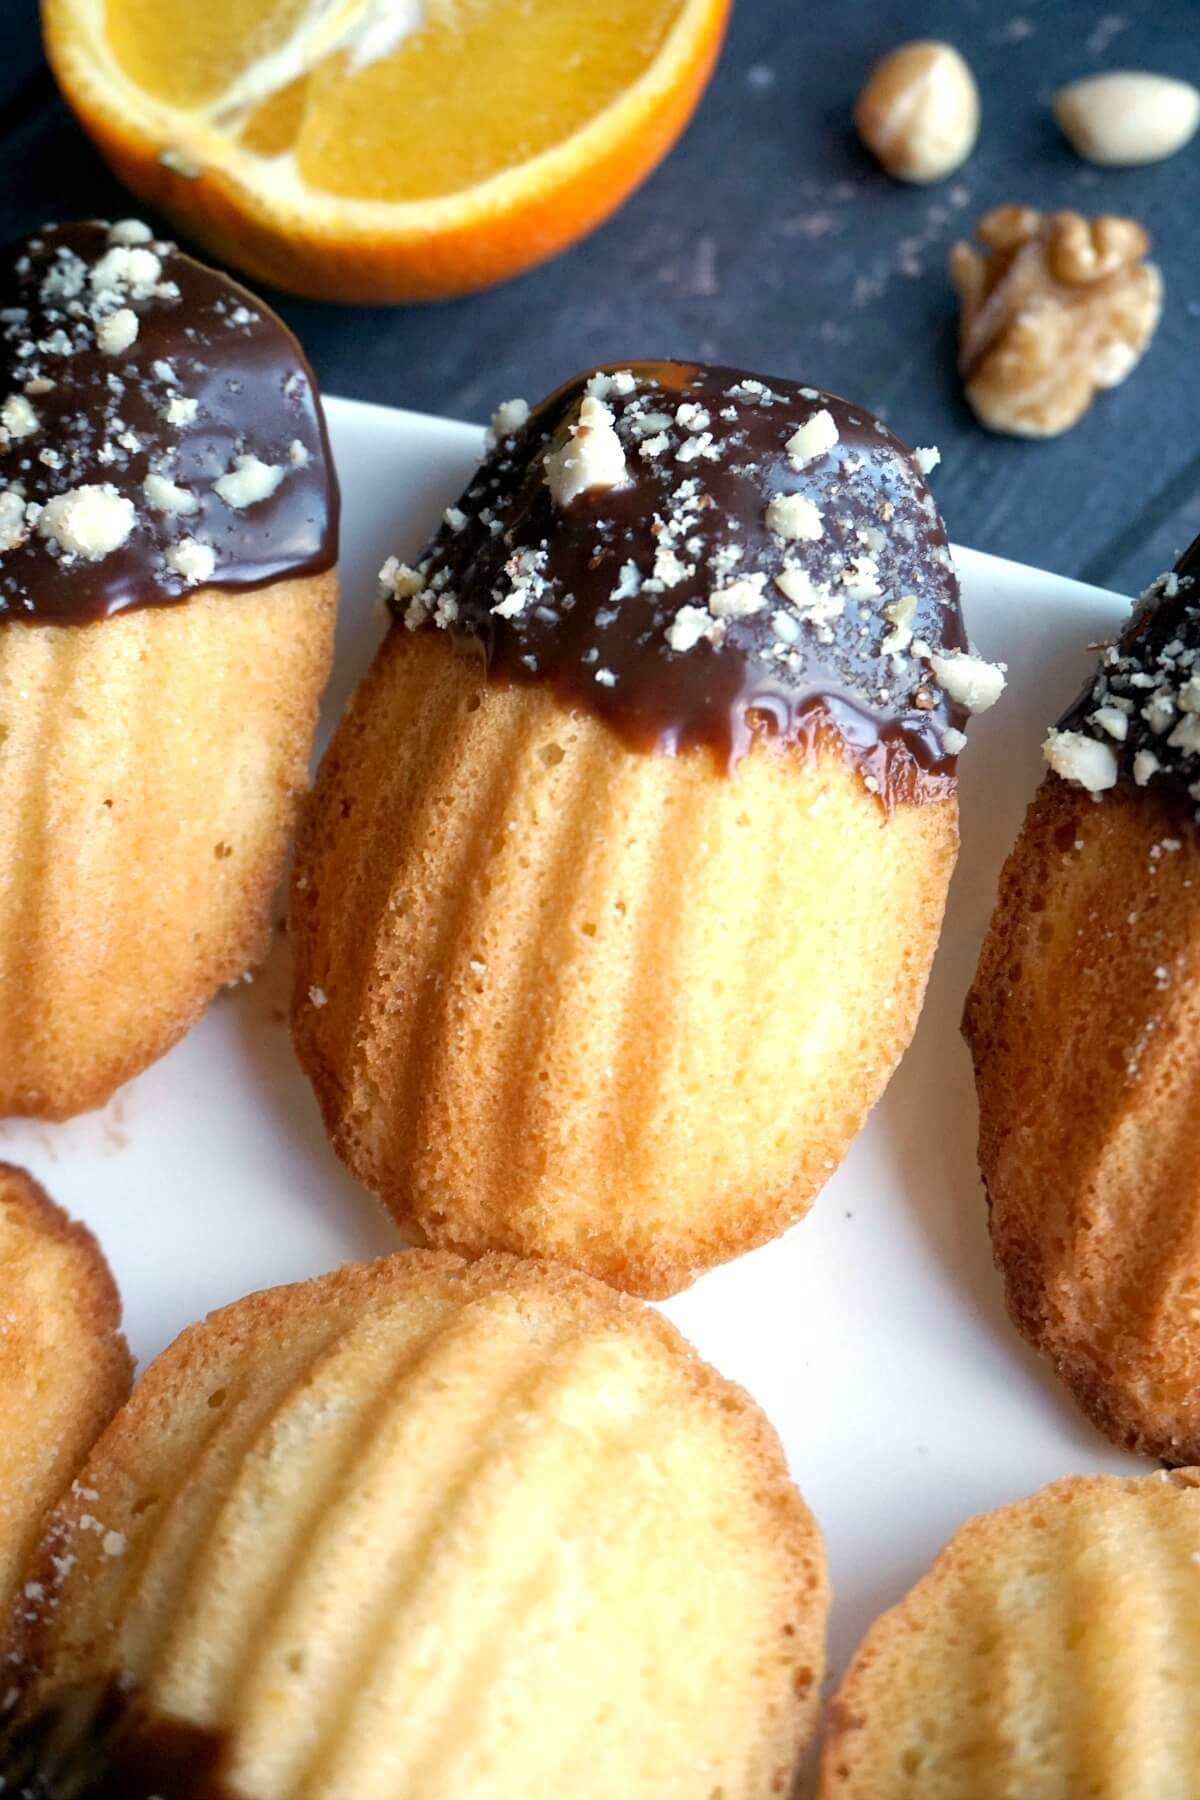 Close-up shoot of orange madeleines dipped in chocolate and chopped nuts arranged on a white plate.